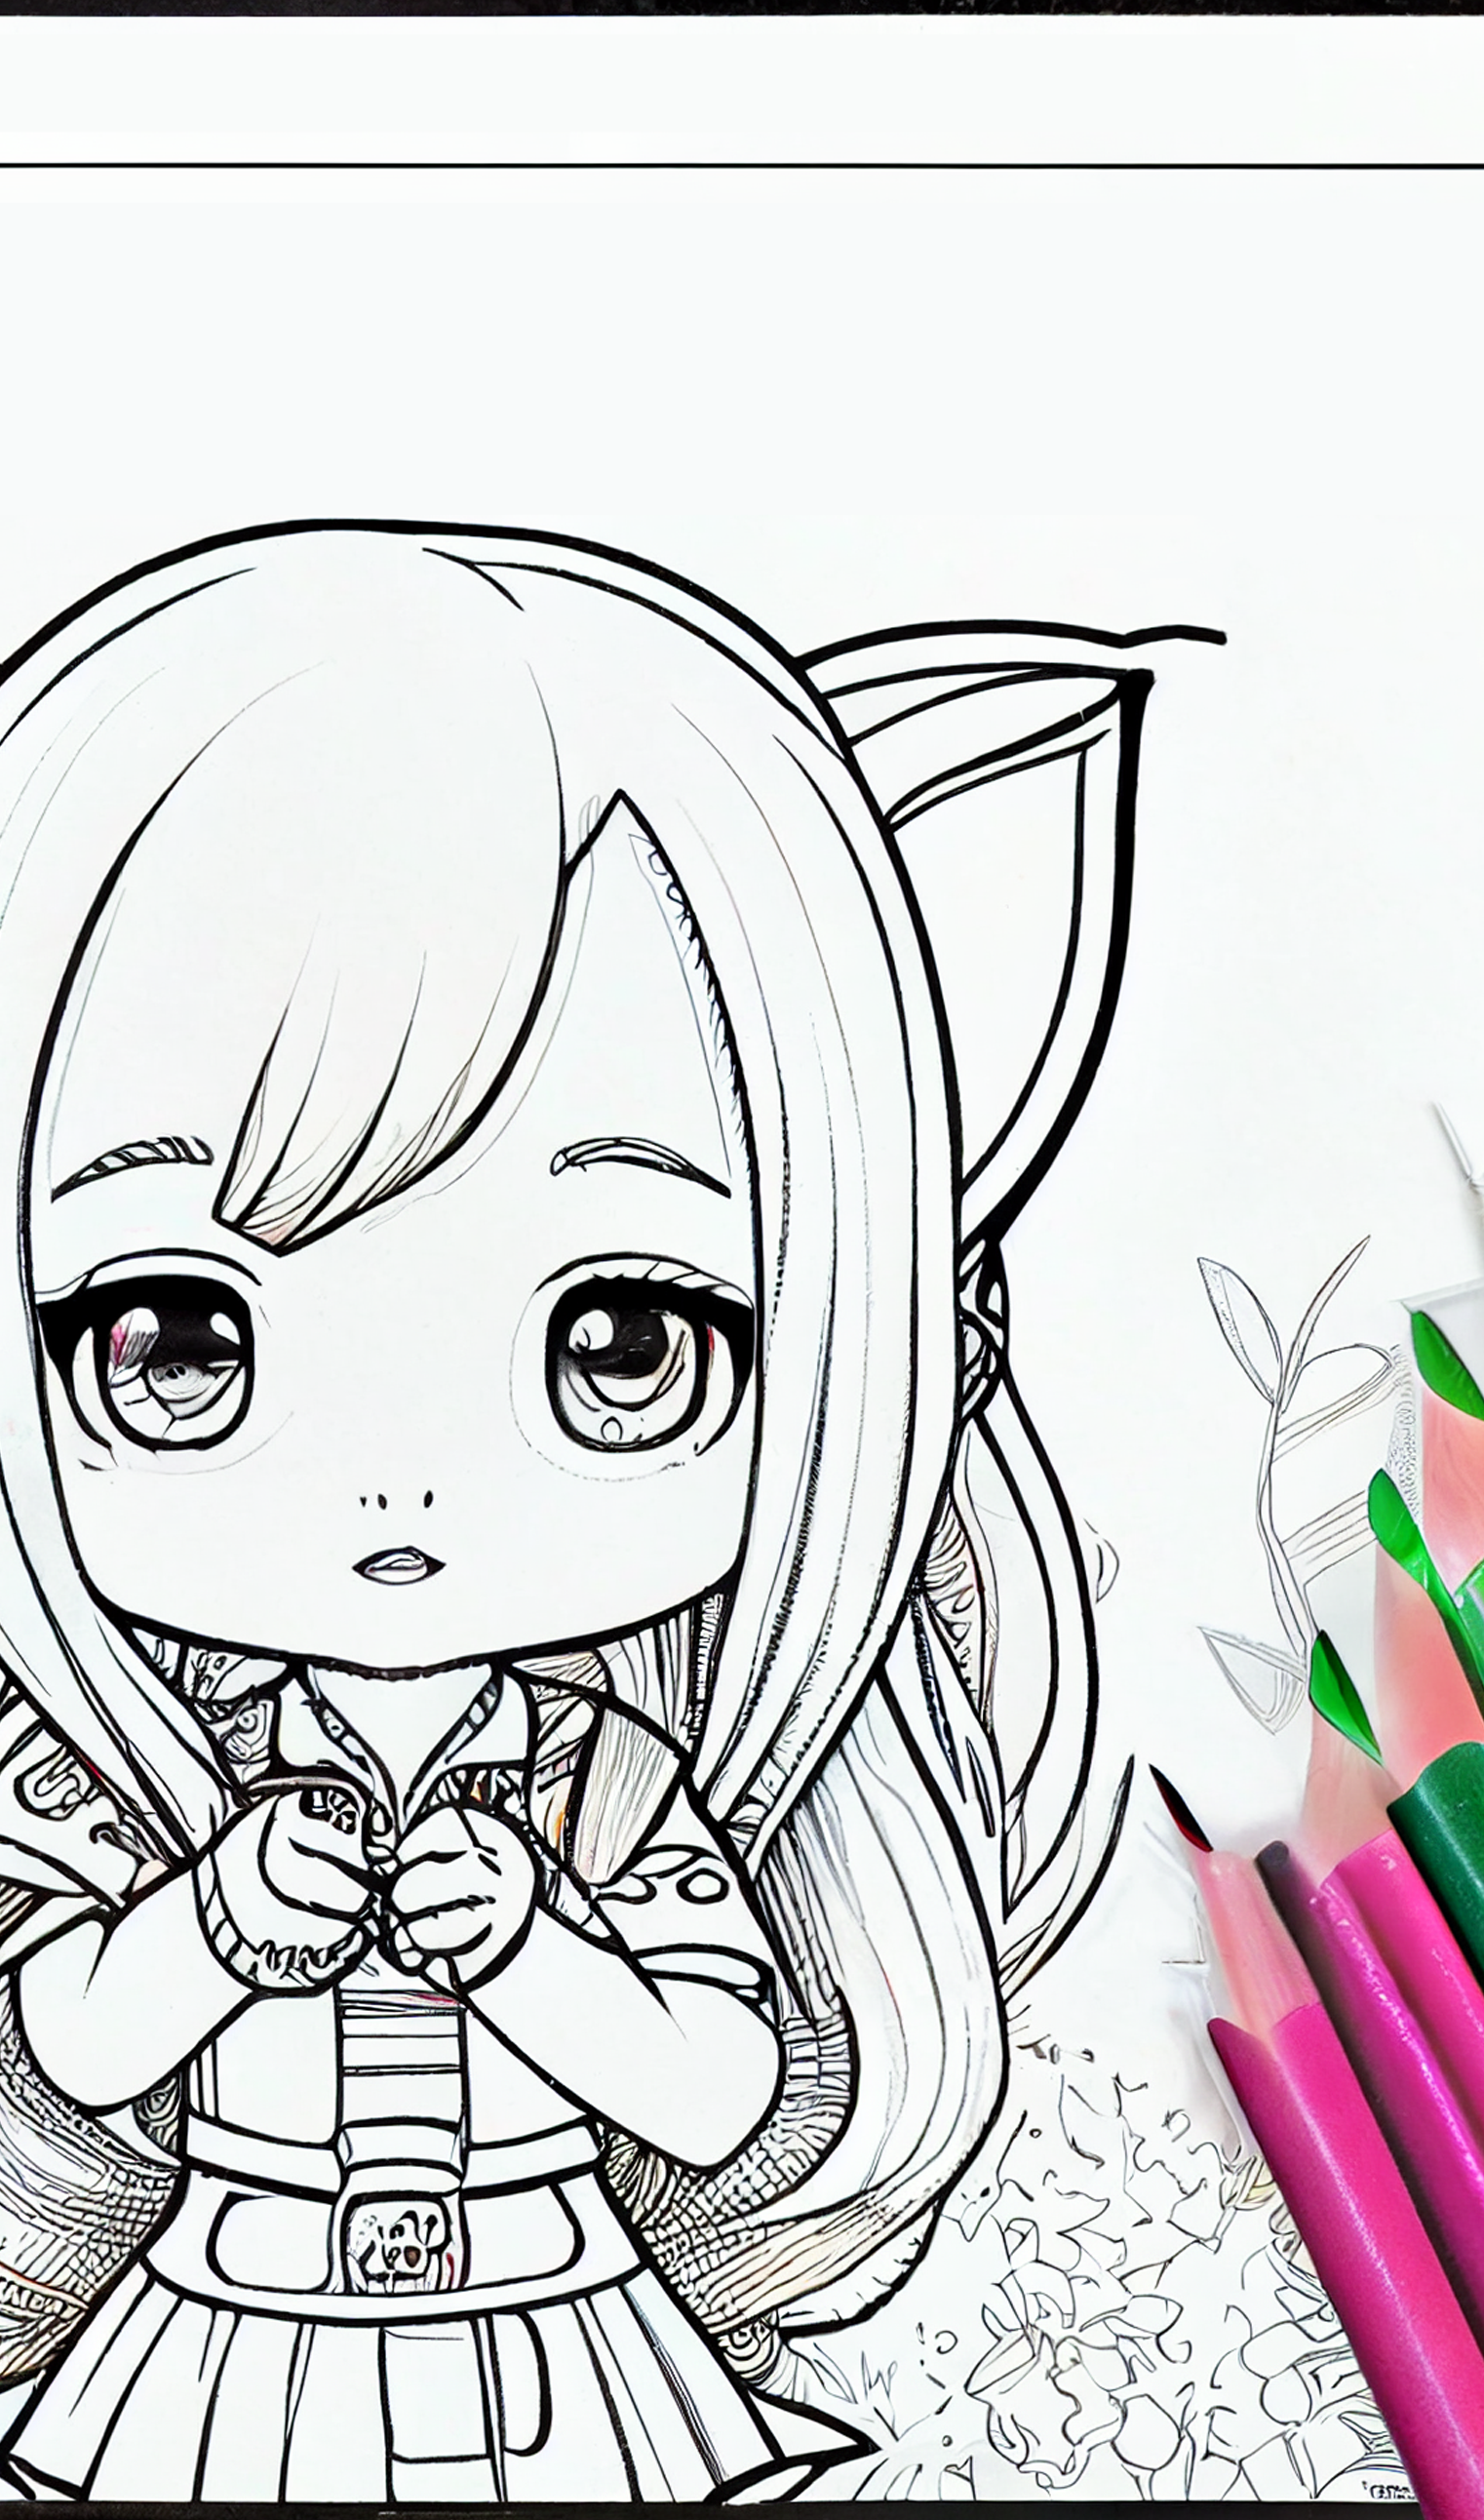 GACHA LIFE Coloring Pages - Free Printables for Kids!